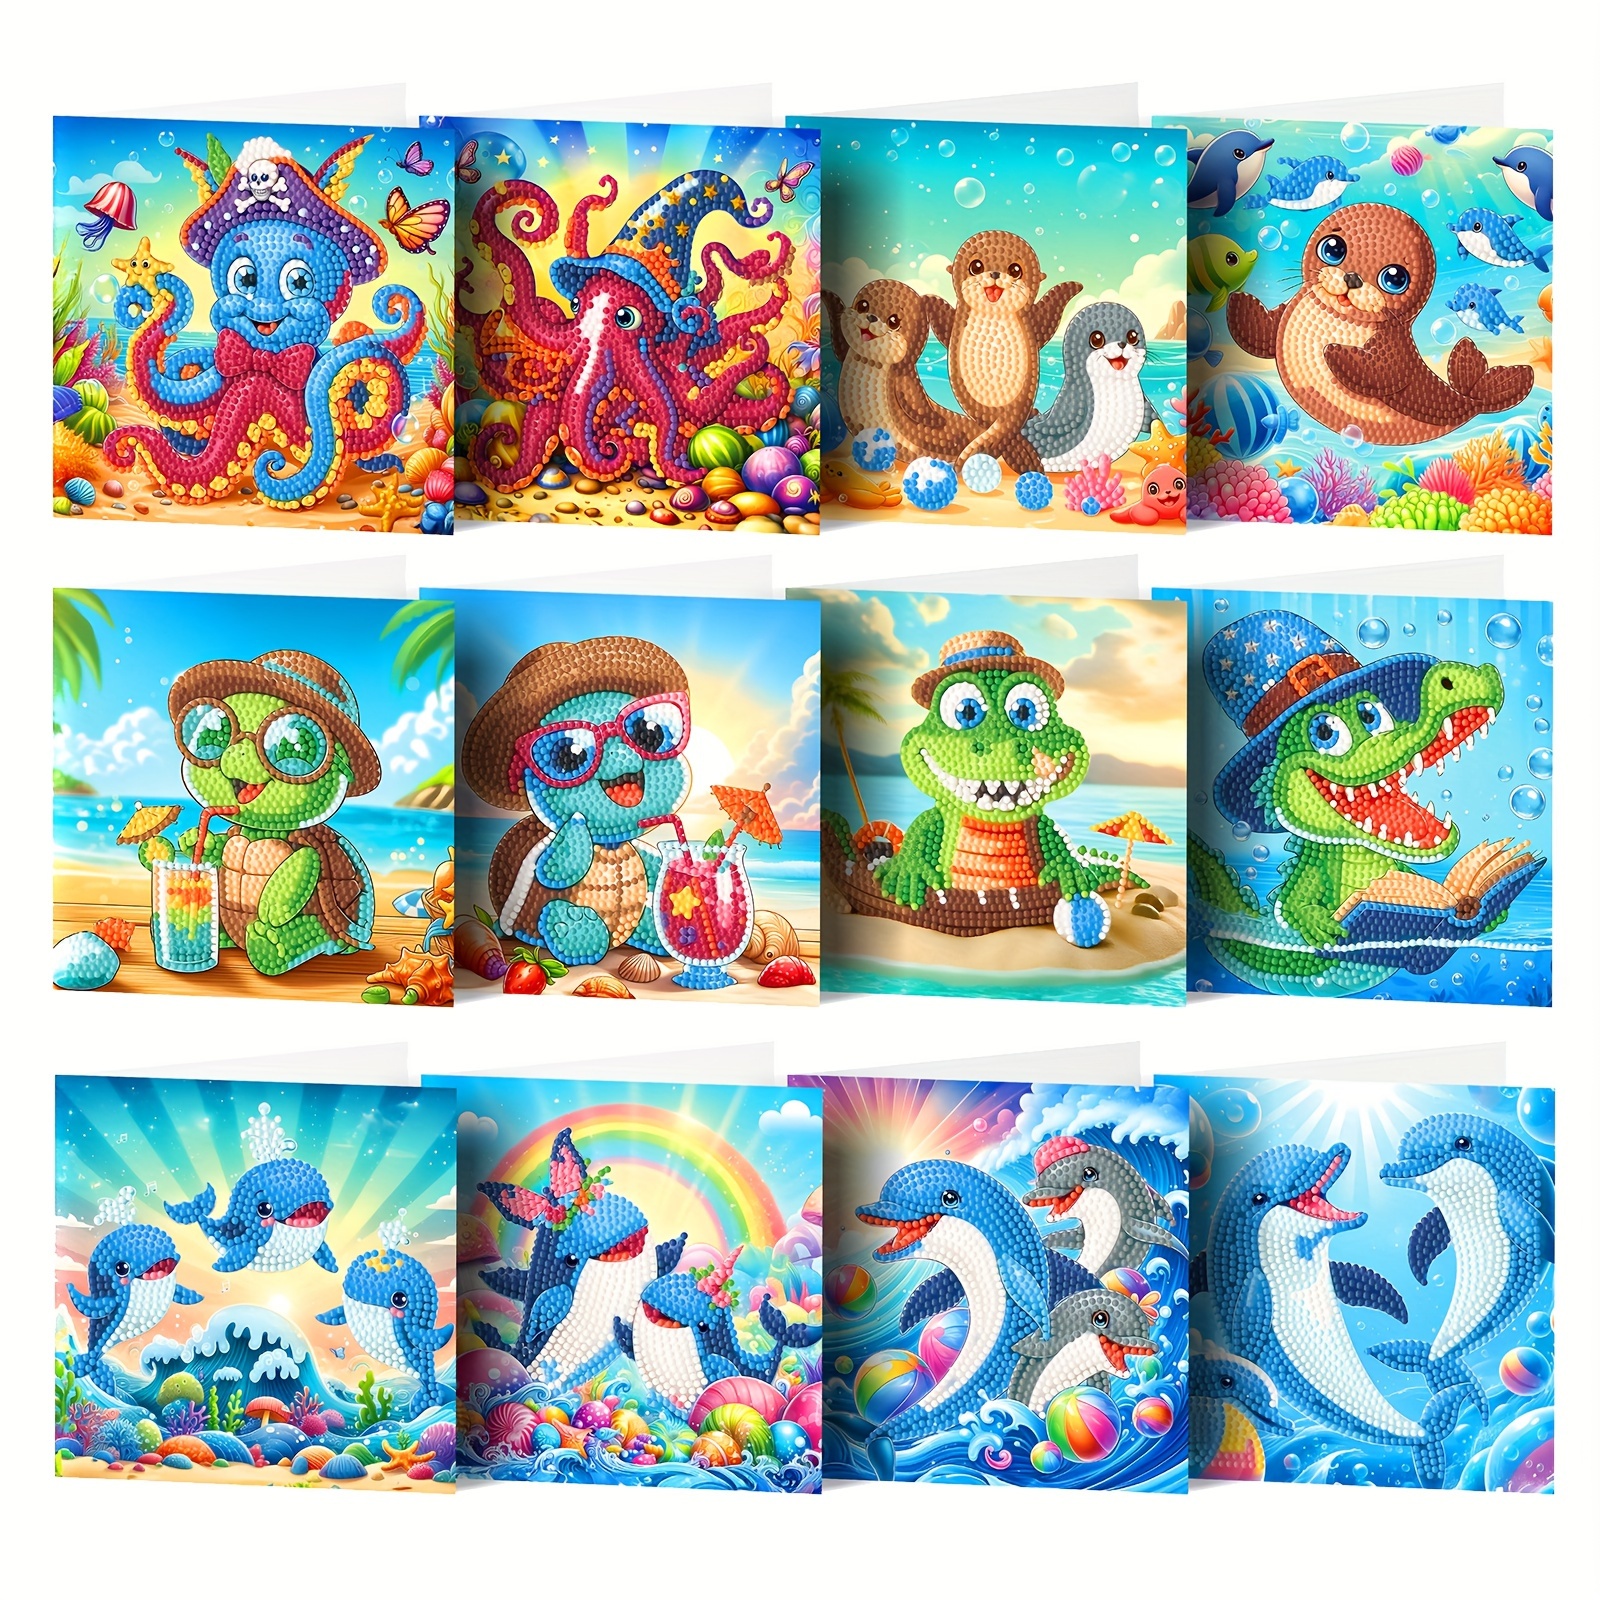 

12-piece Summer Diamond Painting Diy Greeting Cards Set - Ocean Animal Designs, Handcrafted With Round Diamonds On Paper (includes 12 White Envelopes For Personalized Messages)